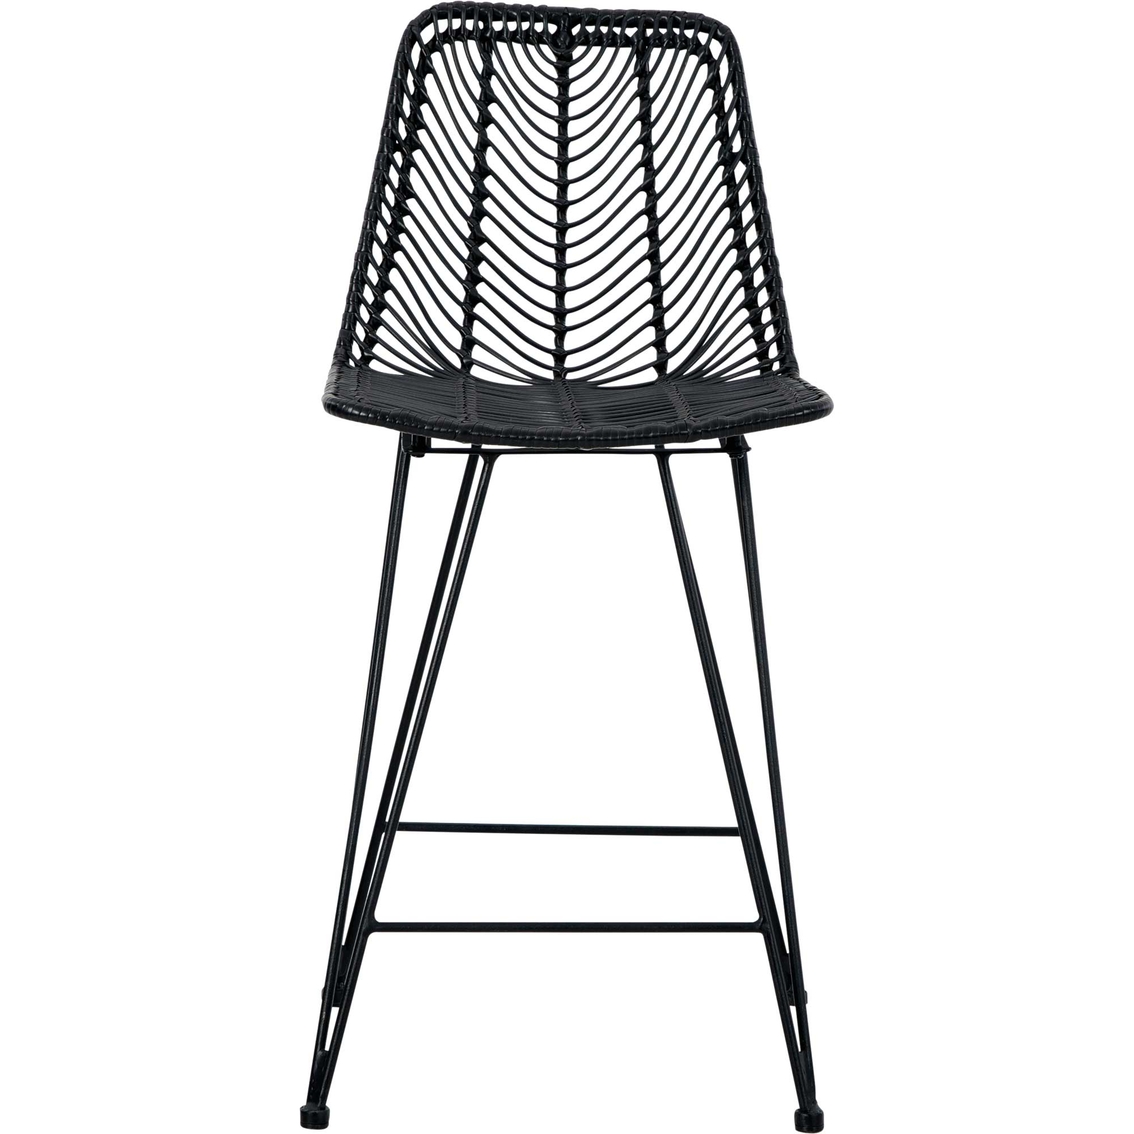 Signature Design by Ashley Angentree Counter Height Stool 2 pk. - Image 2 of 8